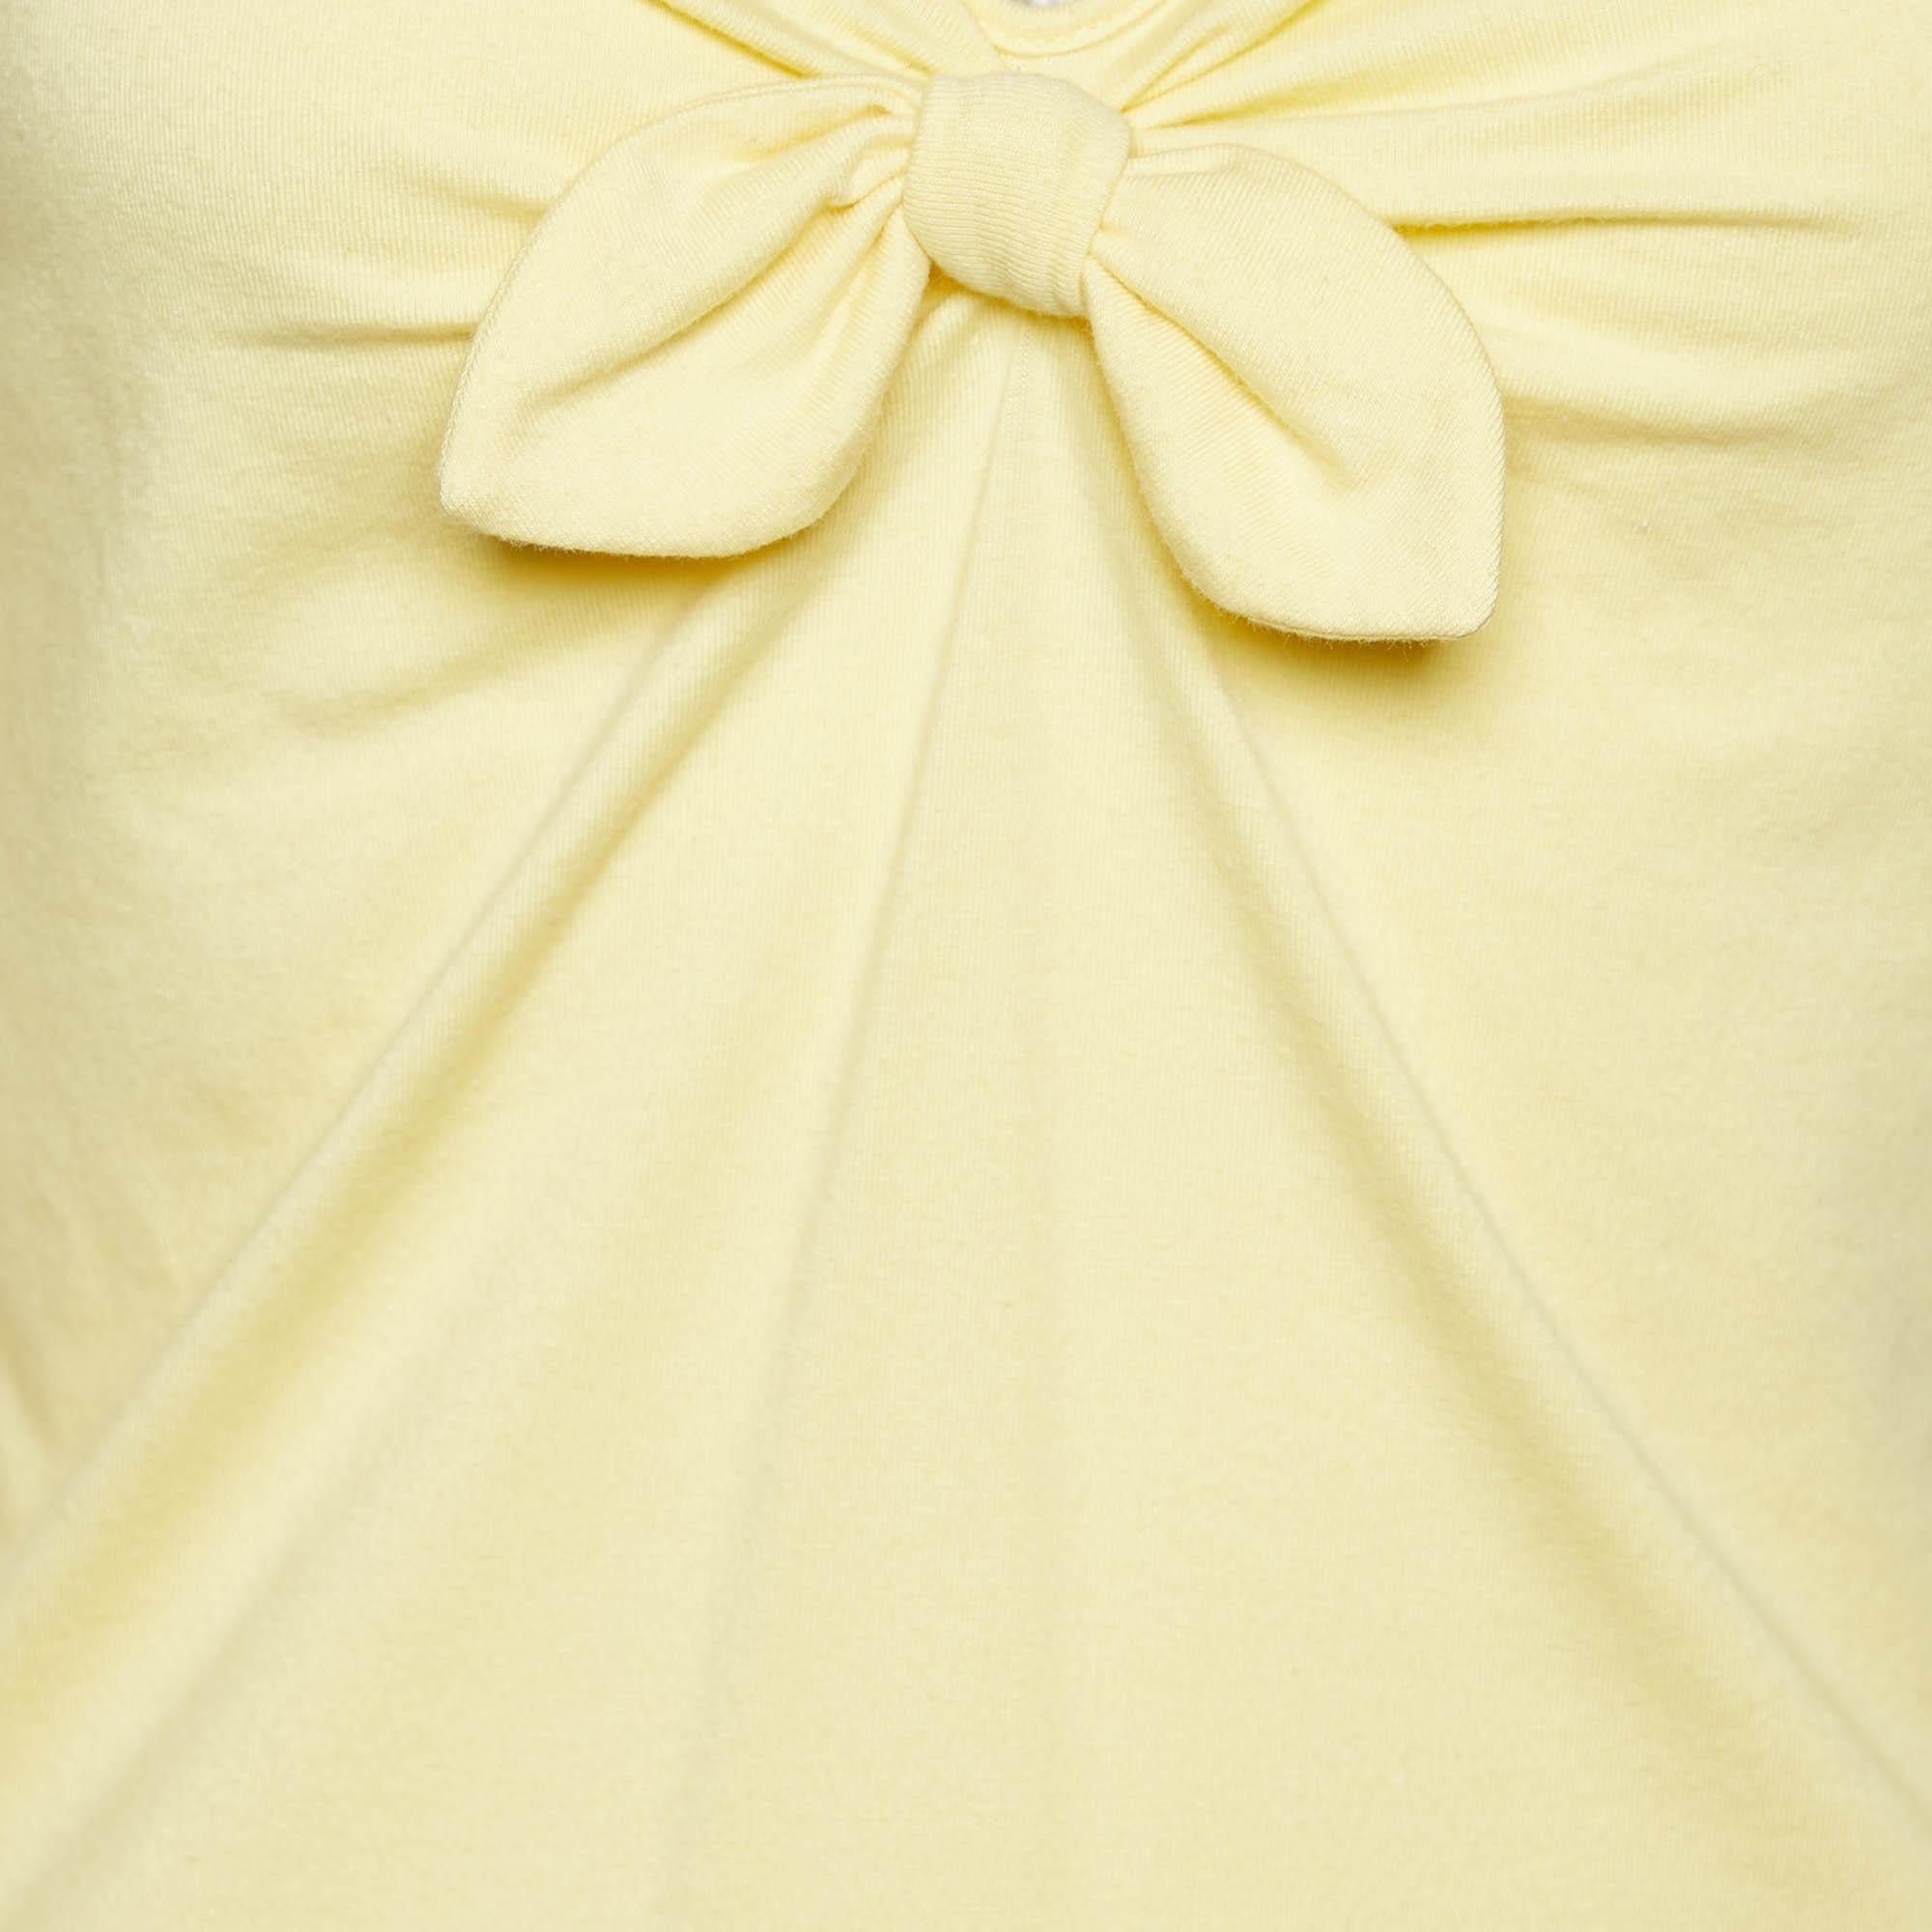 Moschino Cheap and Chic Yellow Cotton Knit Bow Detail T-Shirt M In Excellent Condition For Sale In Dubai, Al Qouz 2